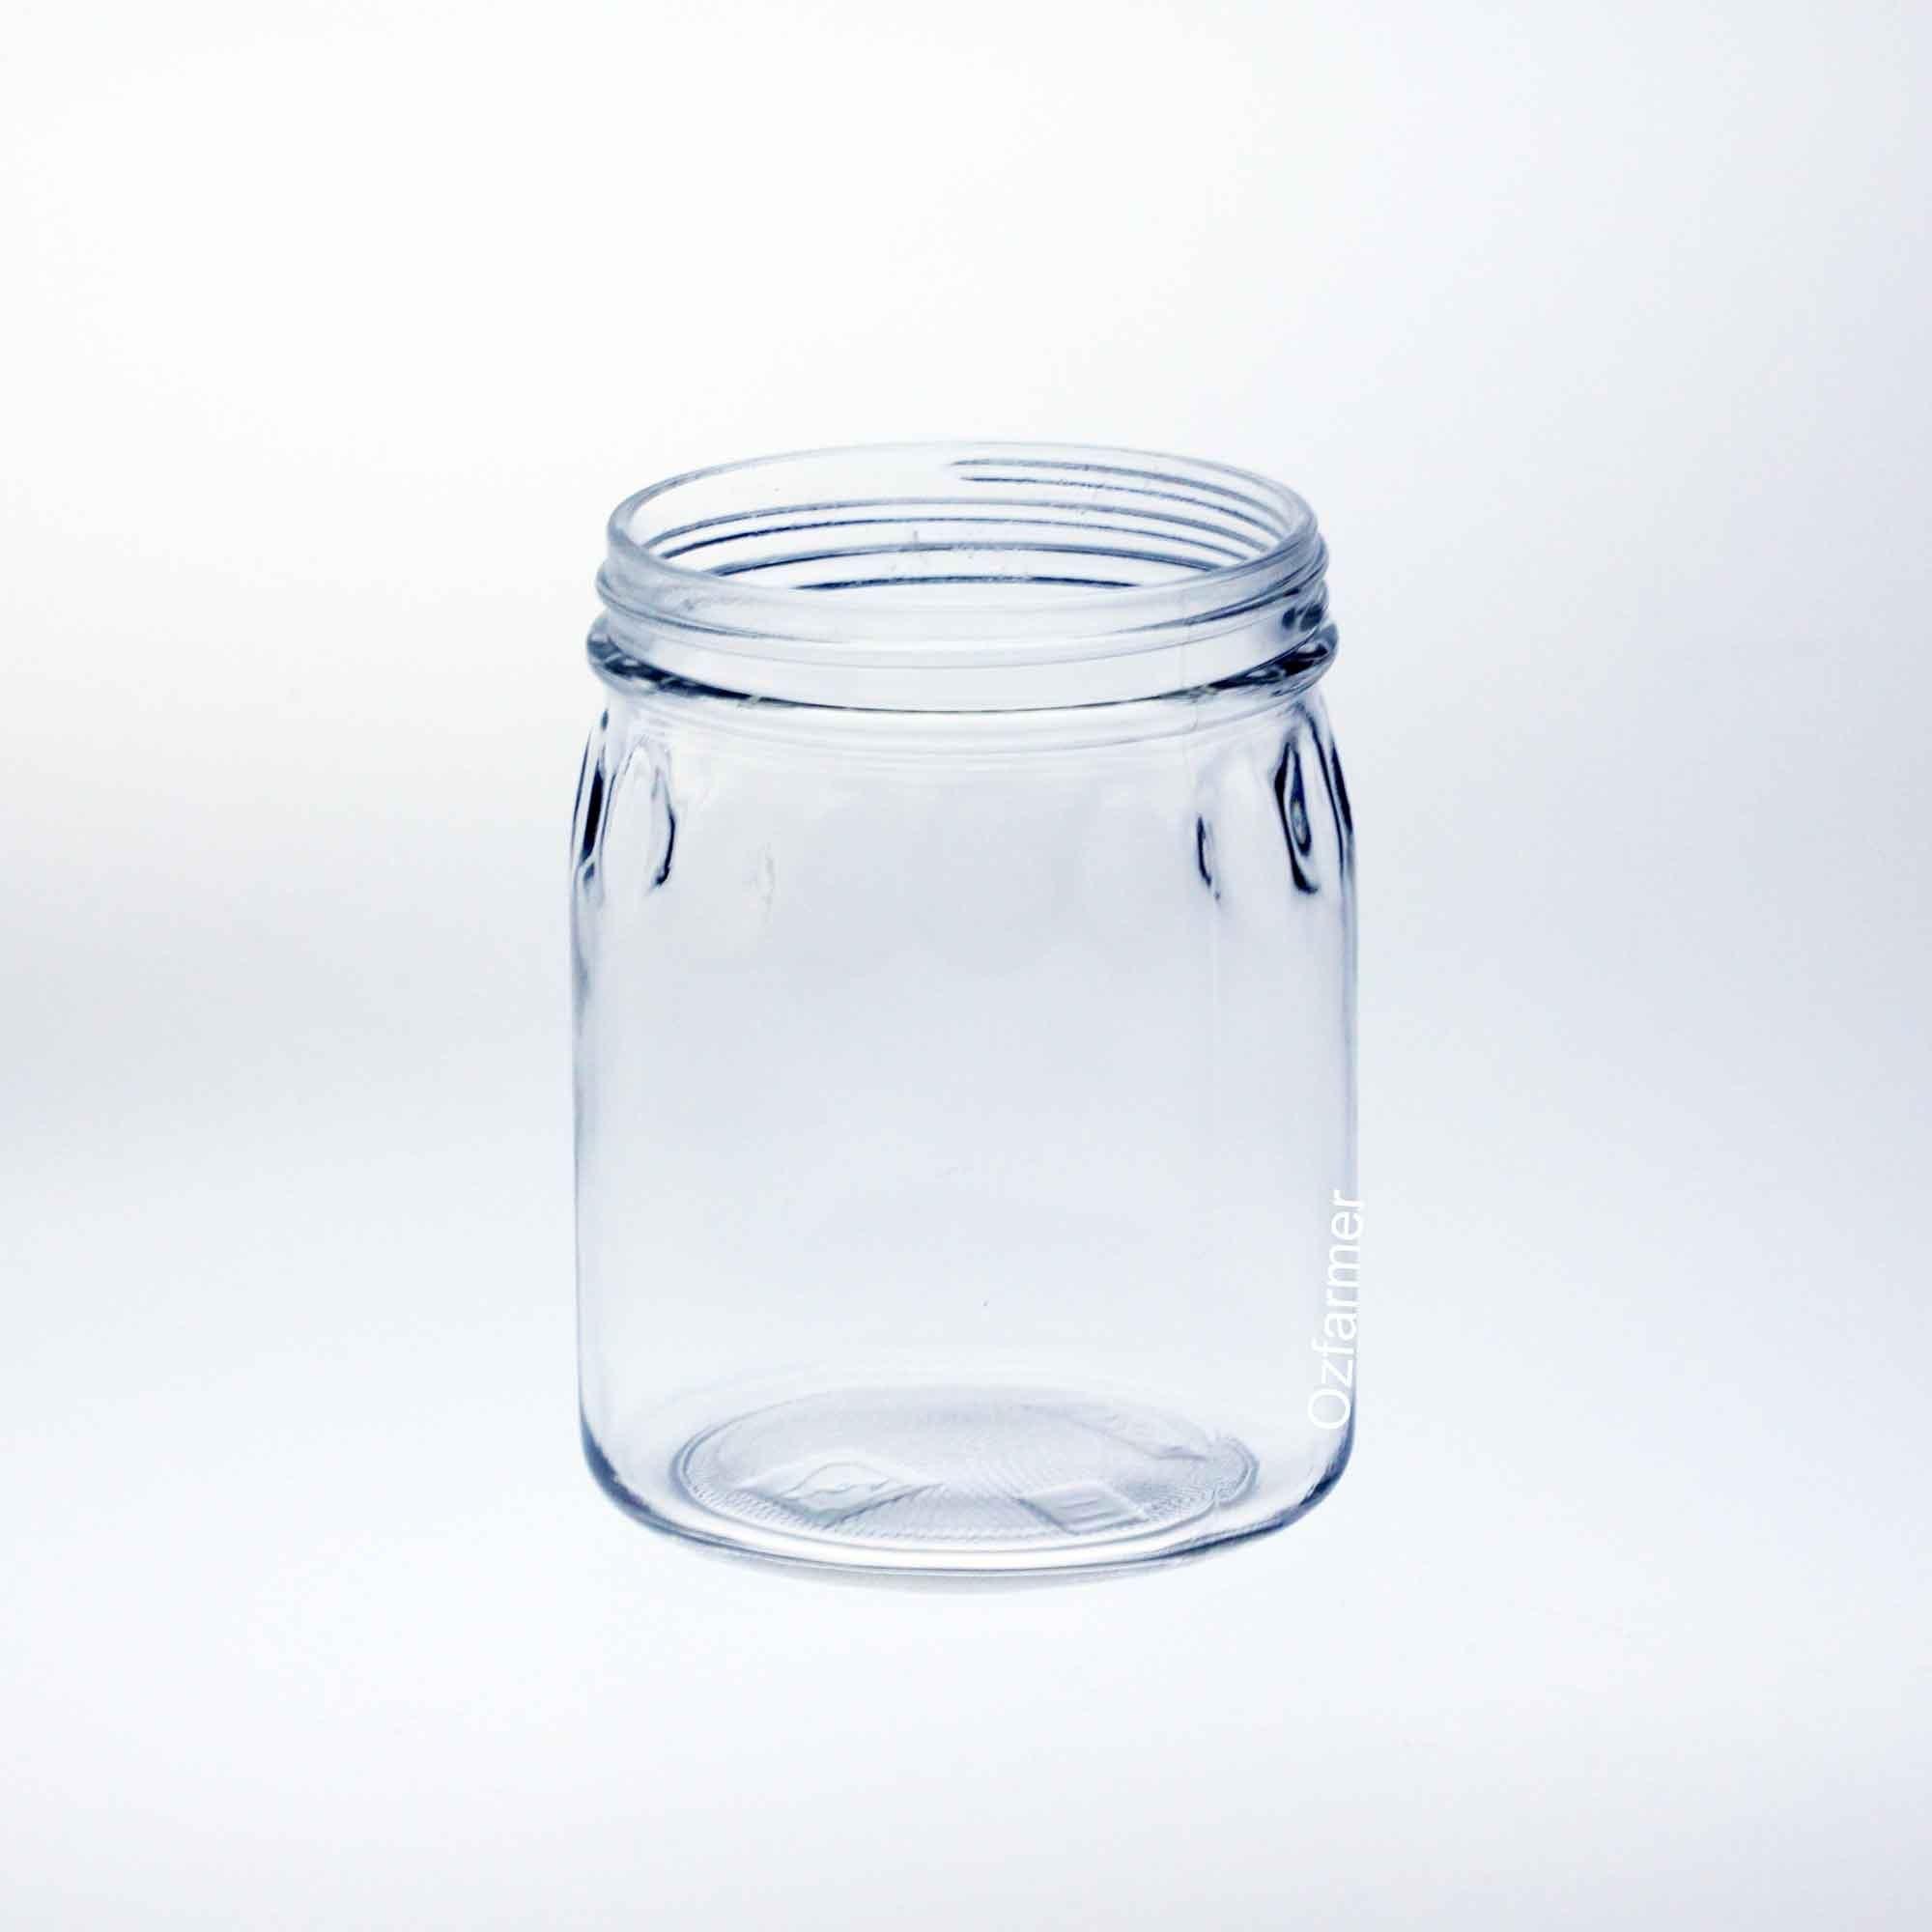 Bell 700ml / 24 oz Thumbprint Jars with - Lid Not included - OzFarmer